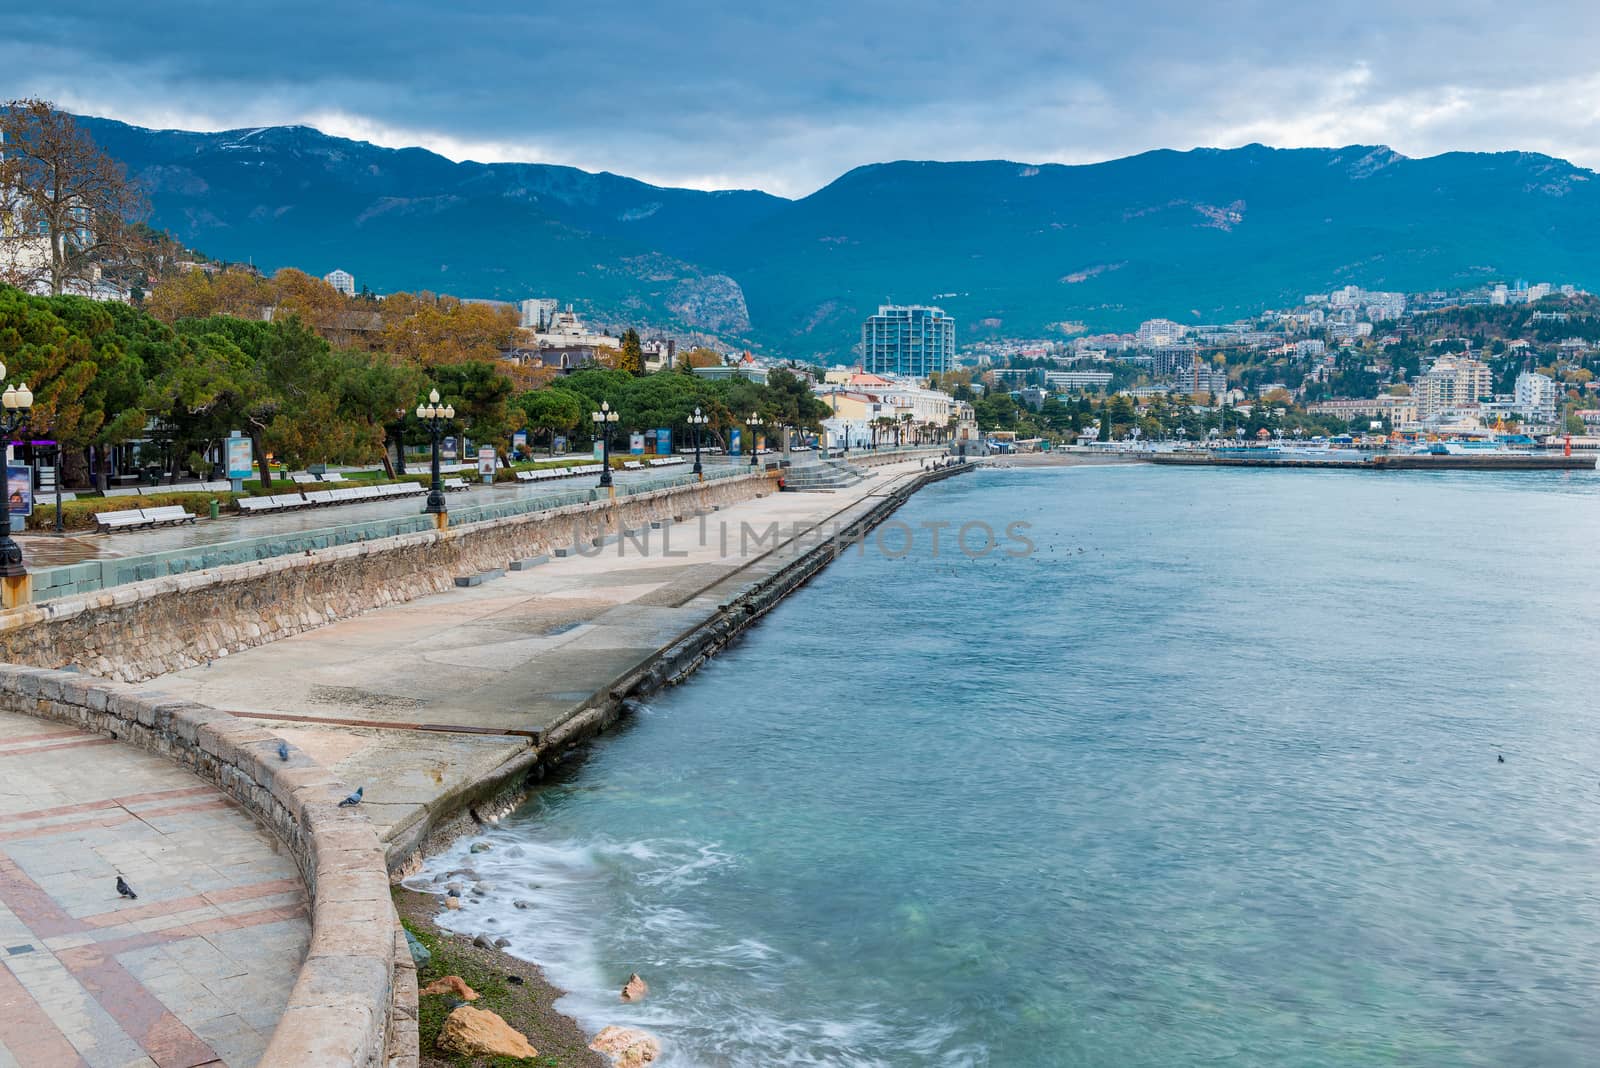 View of the city of Yalta and the embankment of the sea, the mountain peninsula of Crimea, Russia